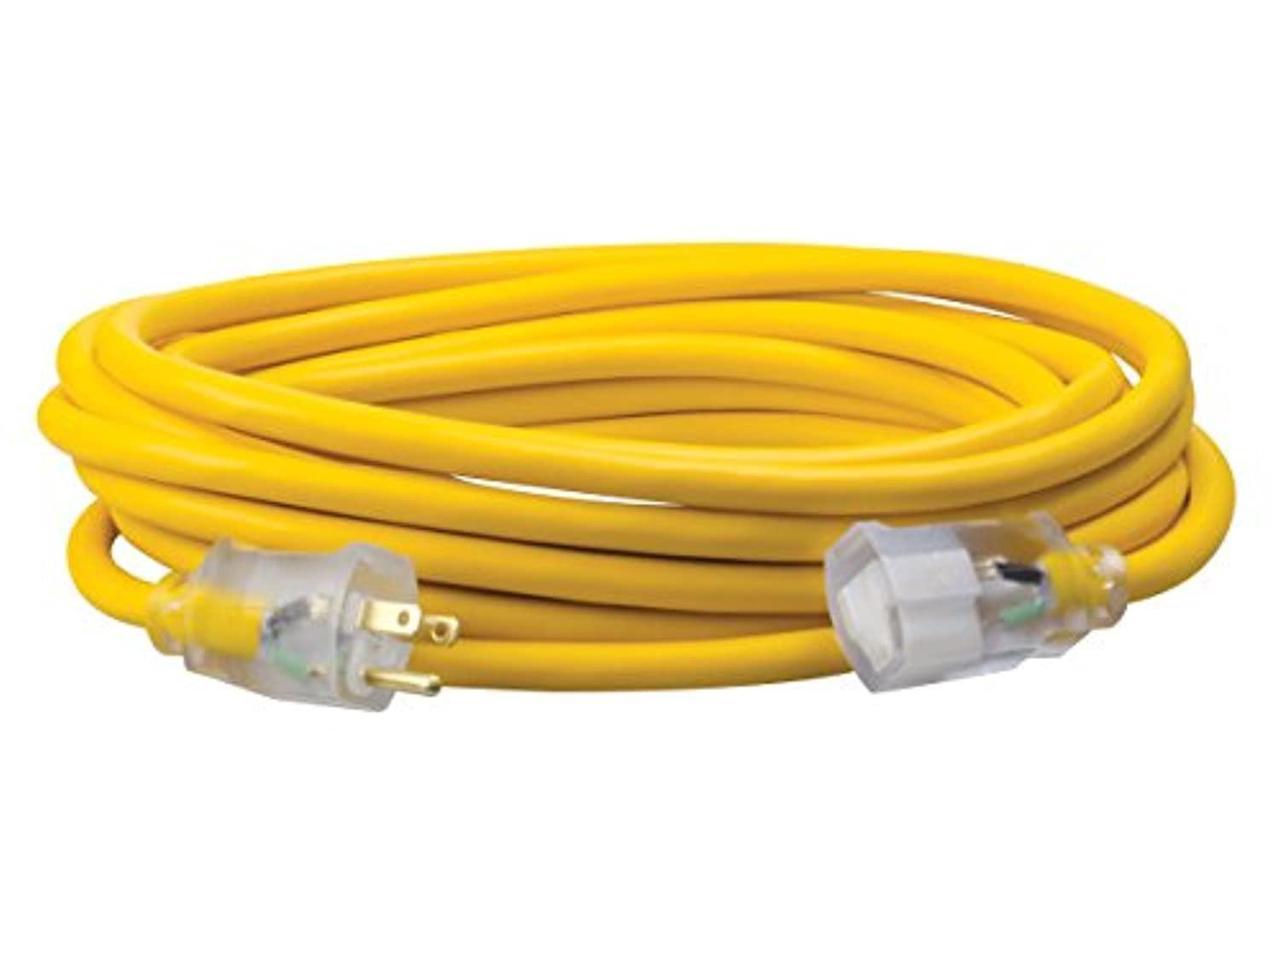 southwire 01687 25-foot 12/3 made in america insulated outdoor extension  cord with lighted end, 3-prong, yellow